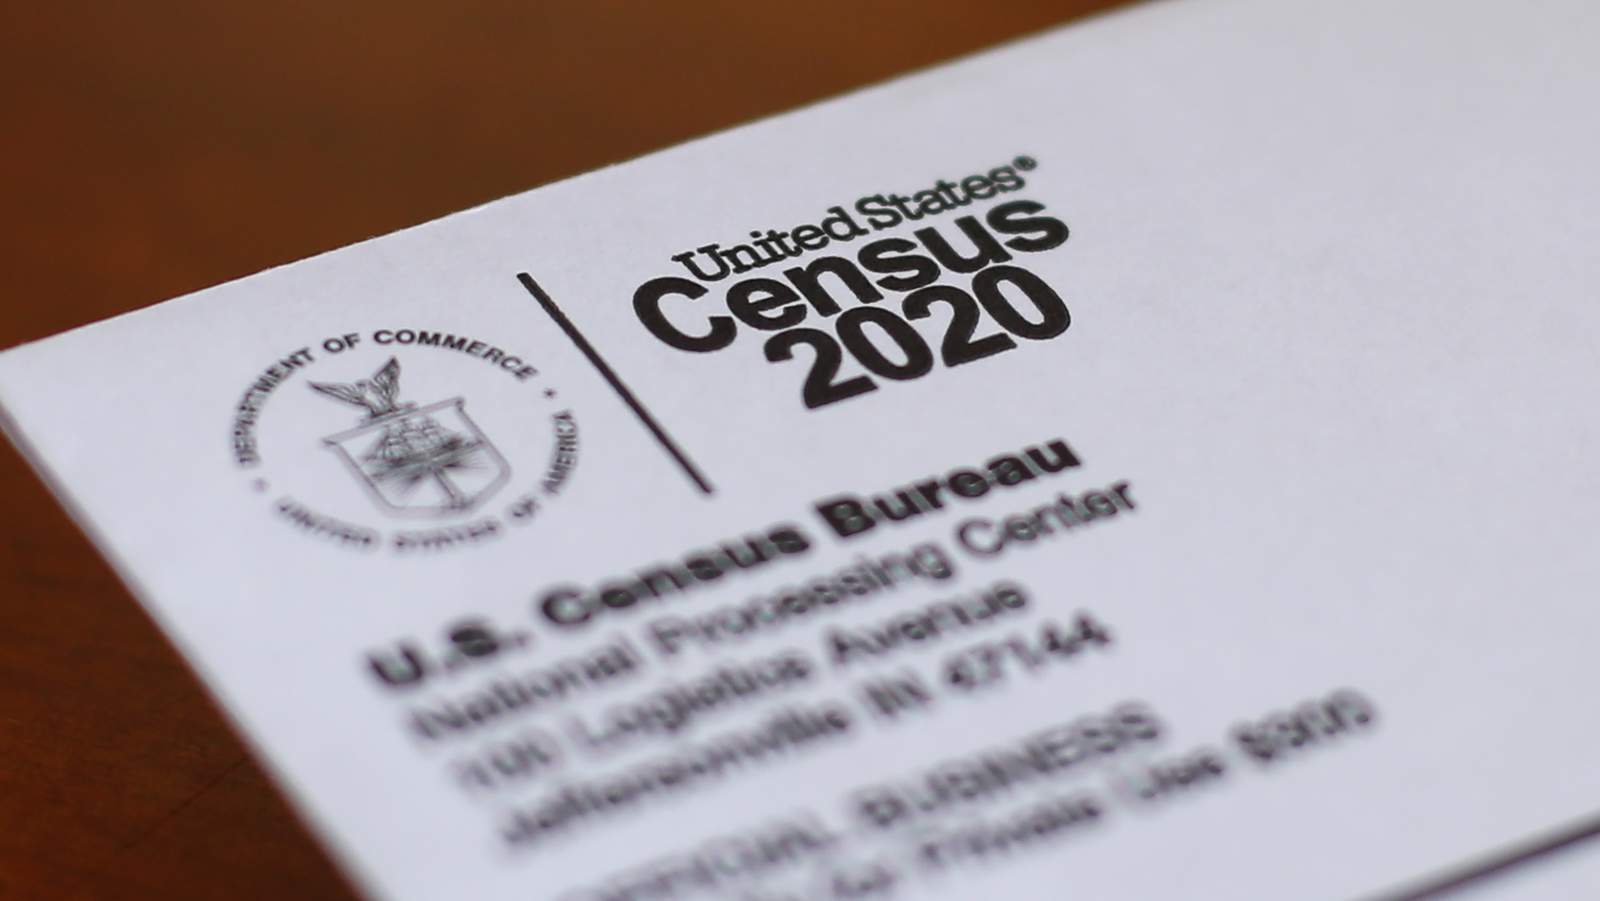 Judge chastises government for not producing census records